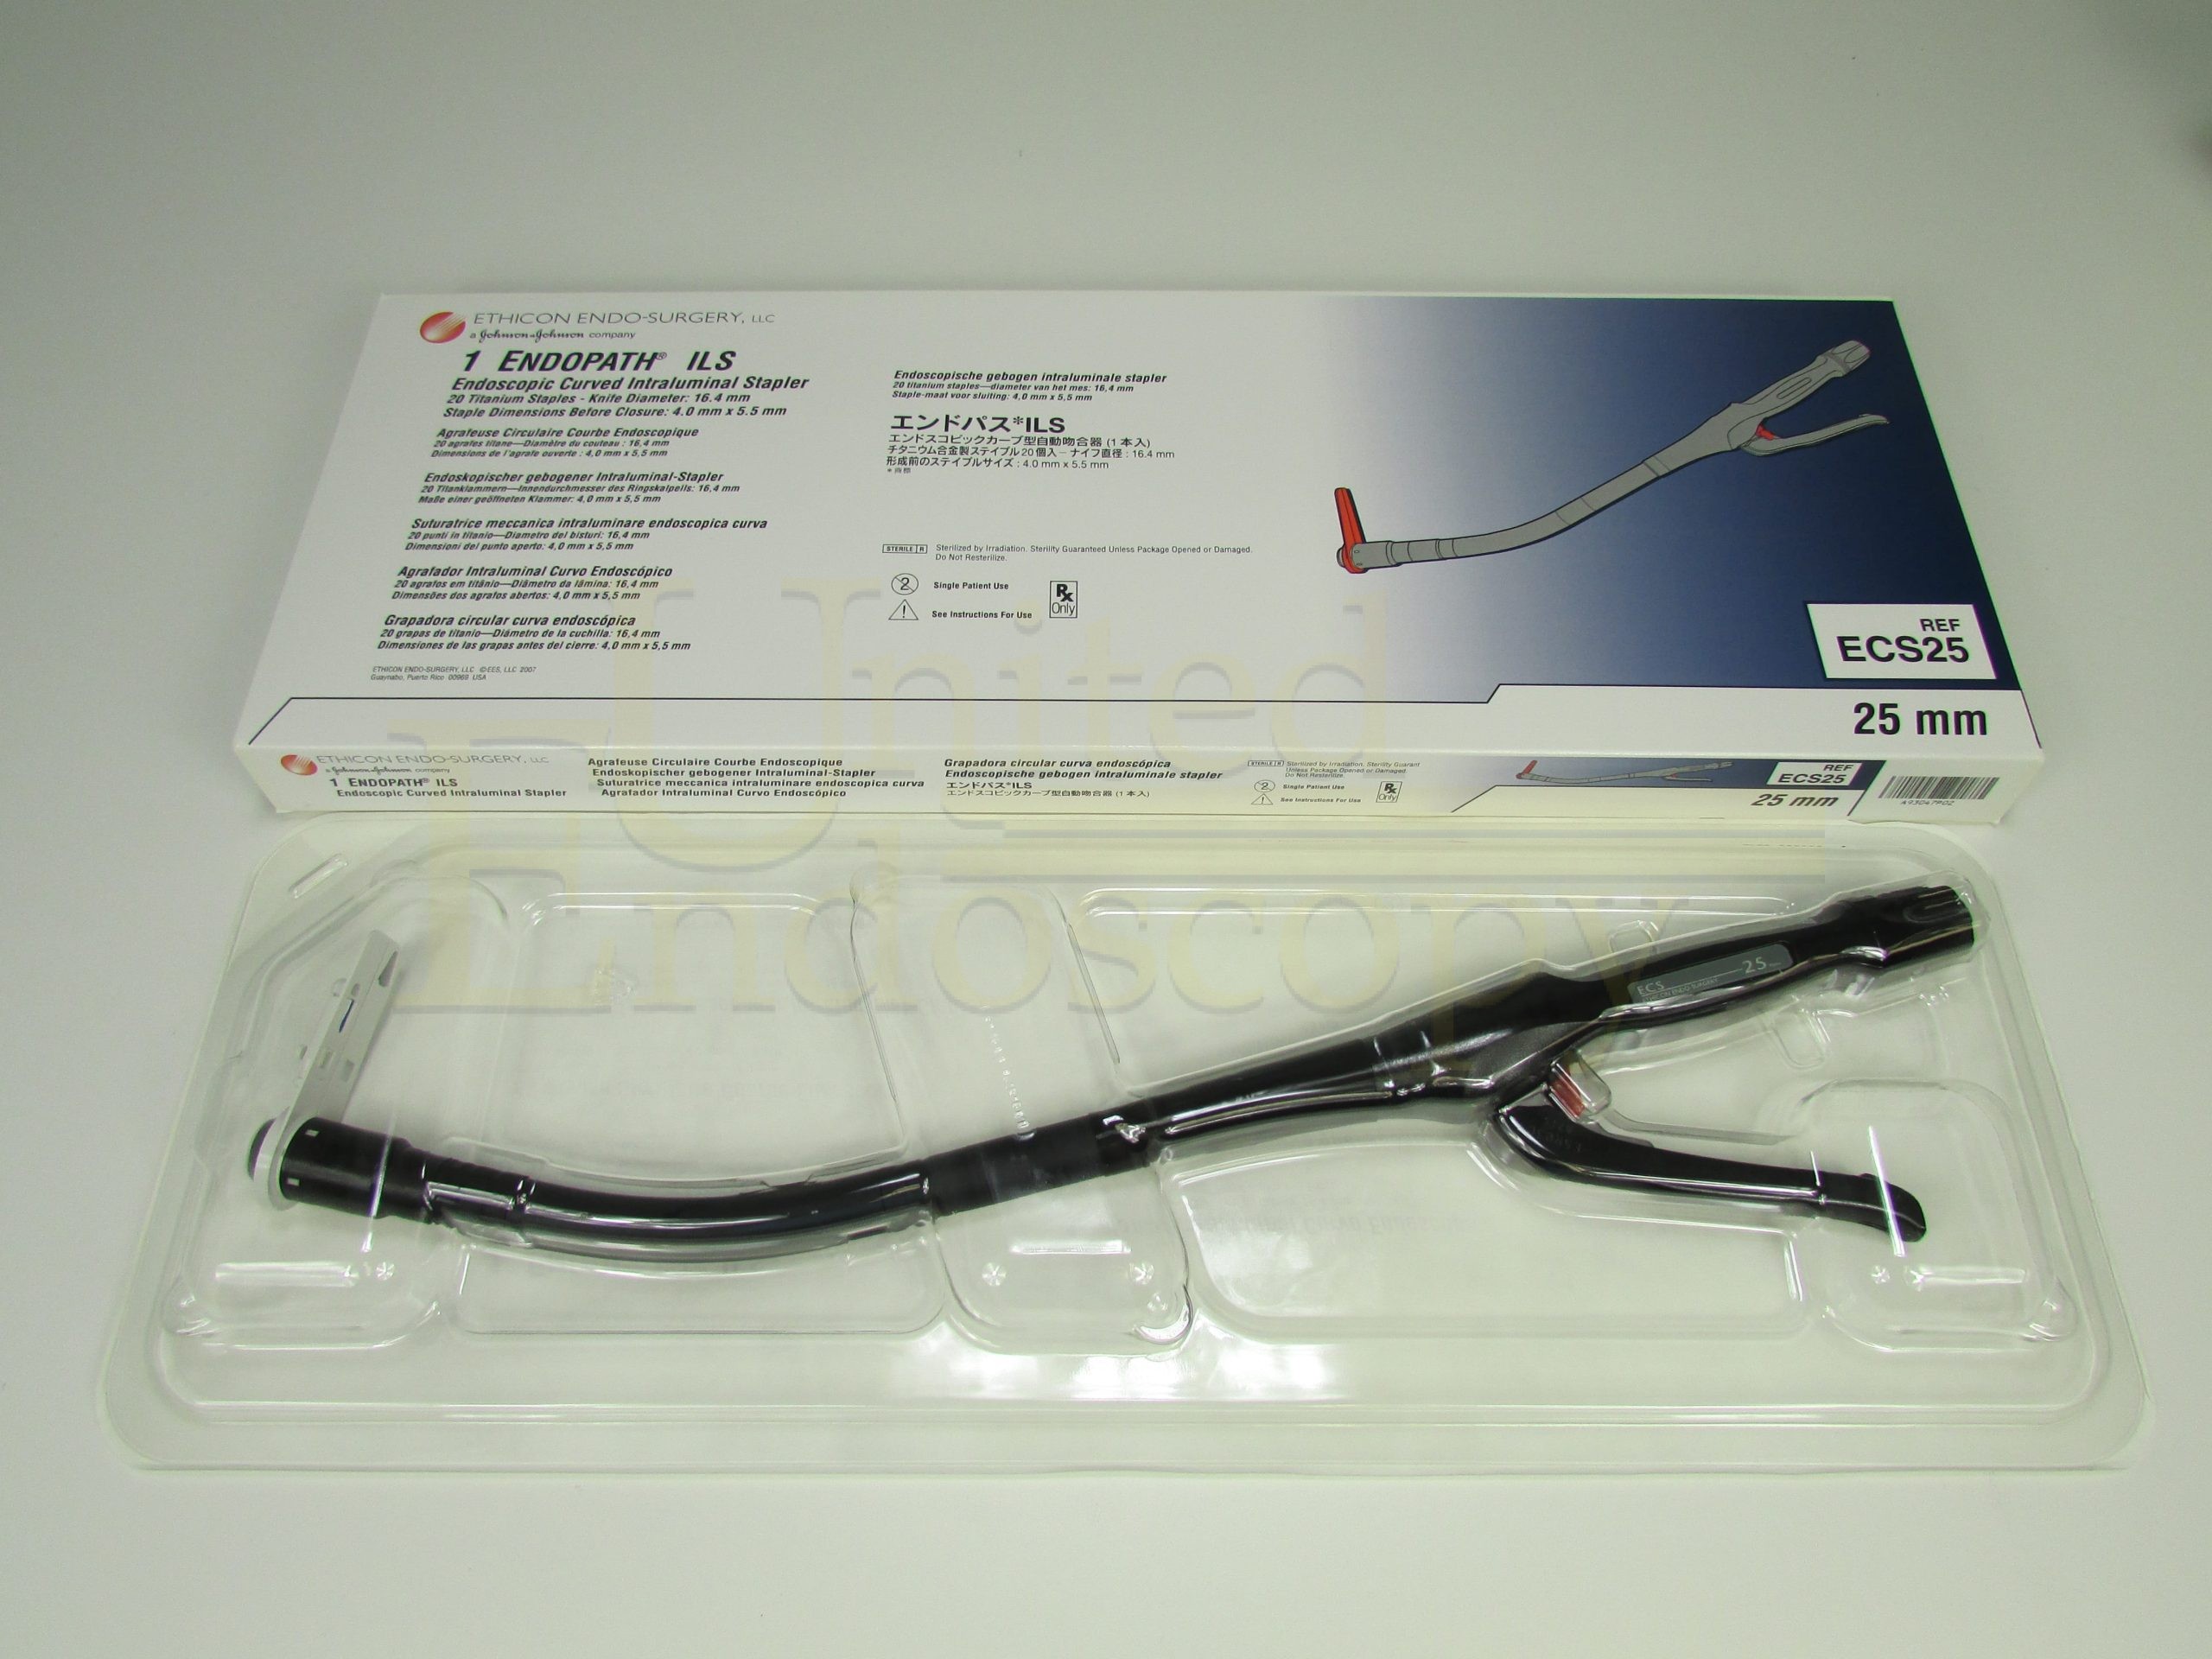 Ethicon 25mm Endoscopic Curved Intraluminal Stapler | United Endoscopy